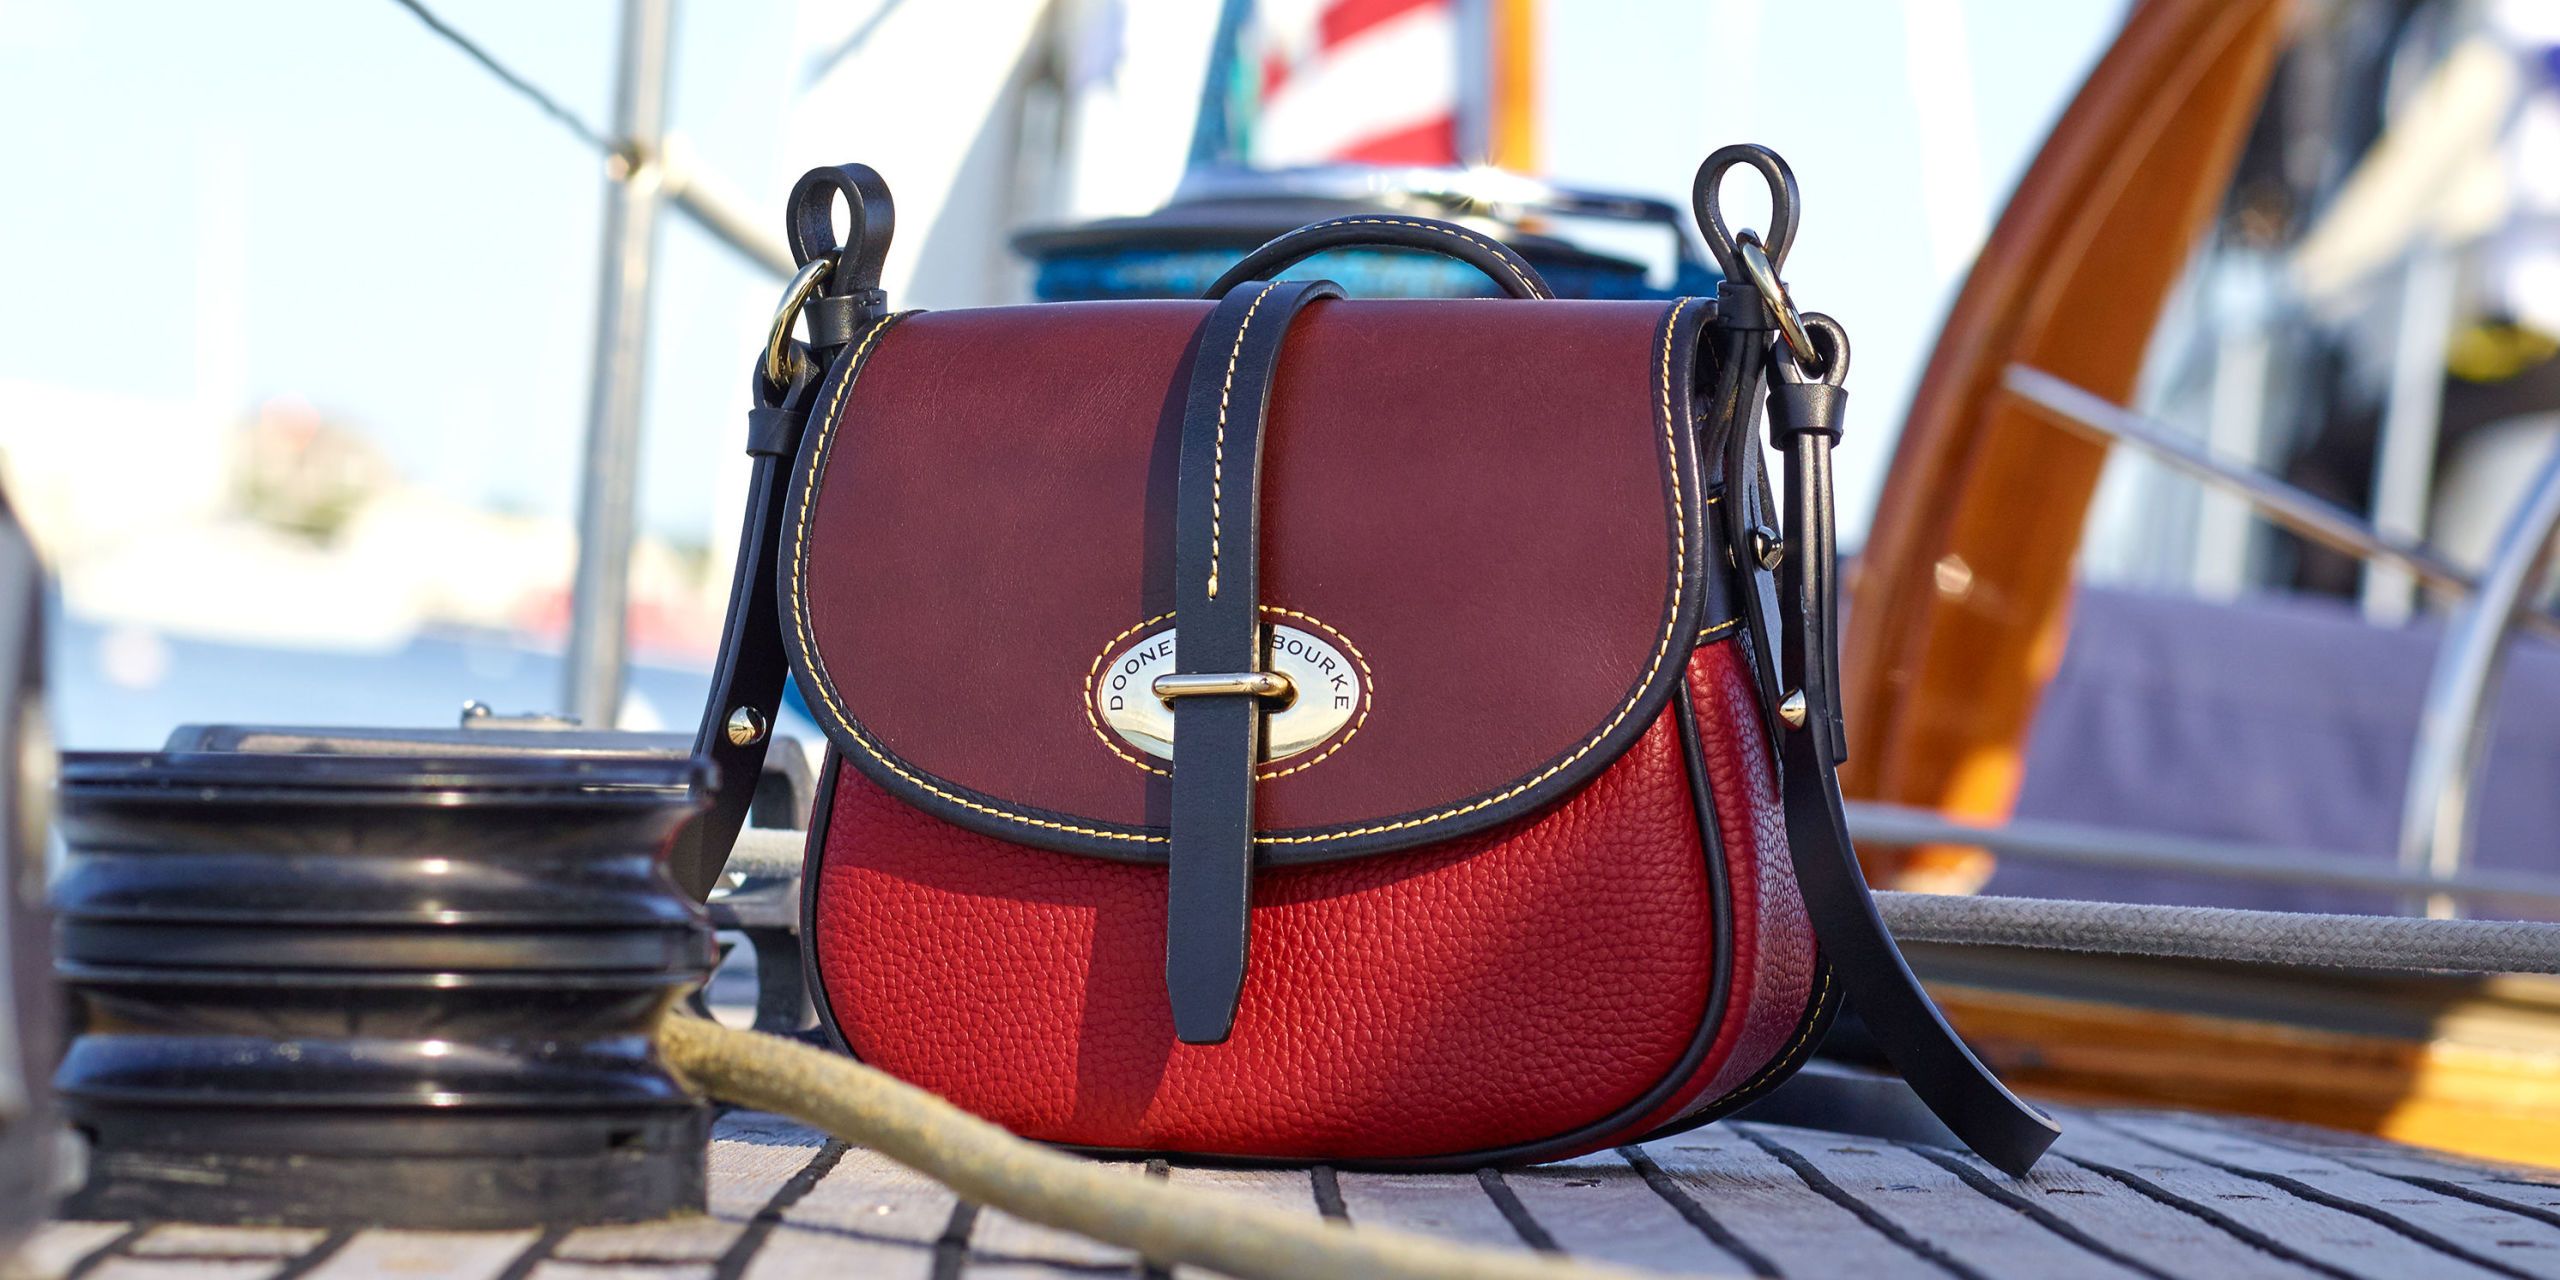 Disney Cruise Line Dooney & Bourke Ship Names/Character Statue Bags Now  Available from the shopDisney Online Store • The Disney Cruise Line Blog